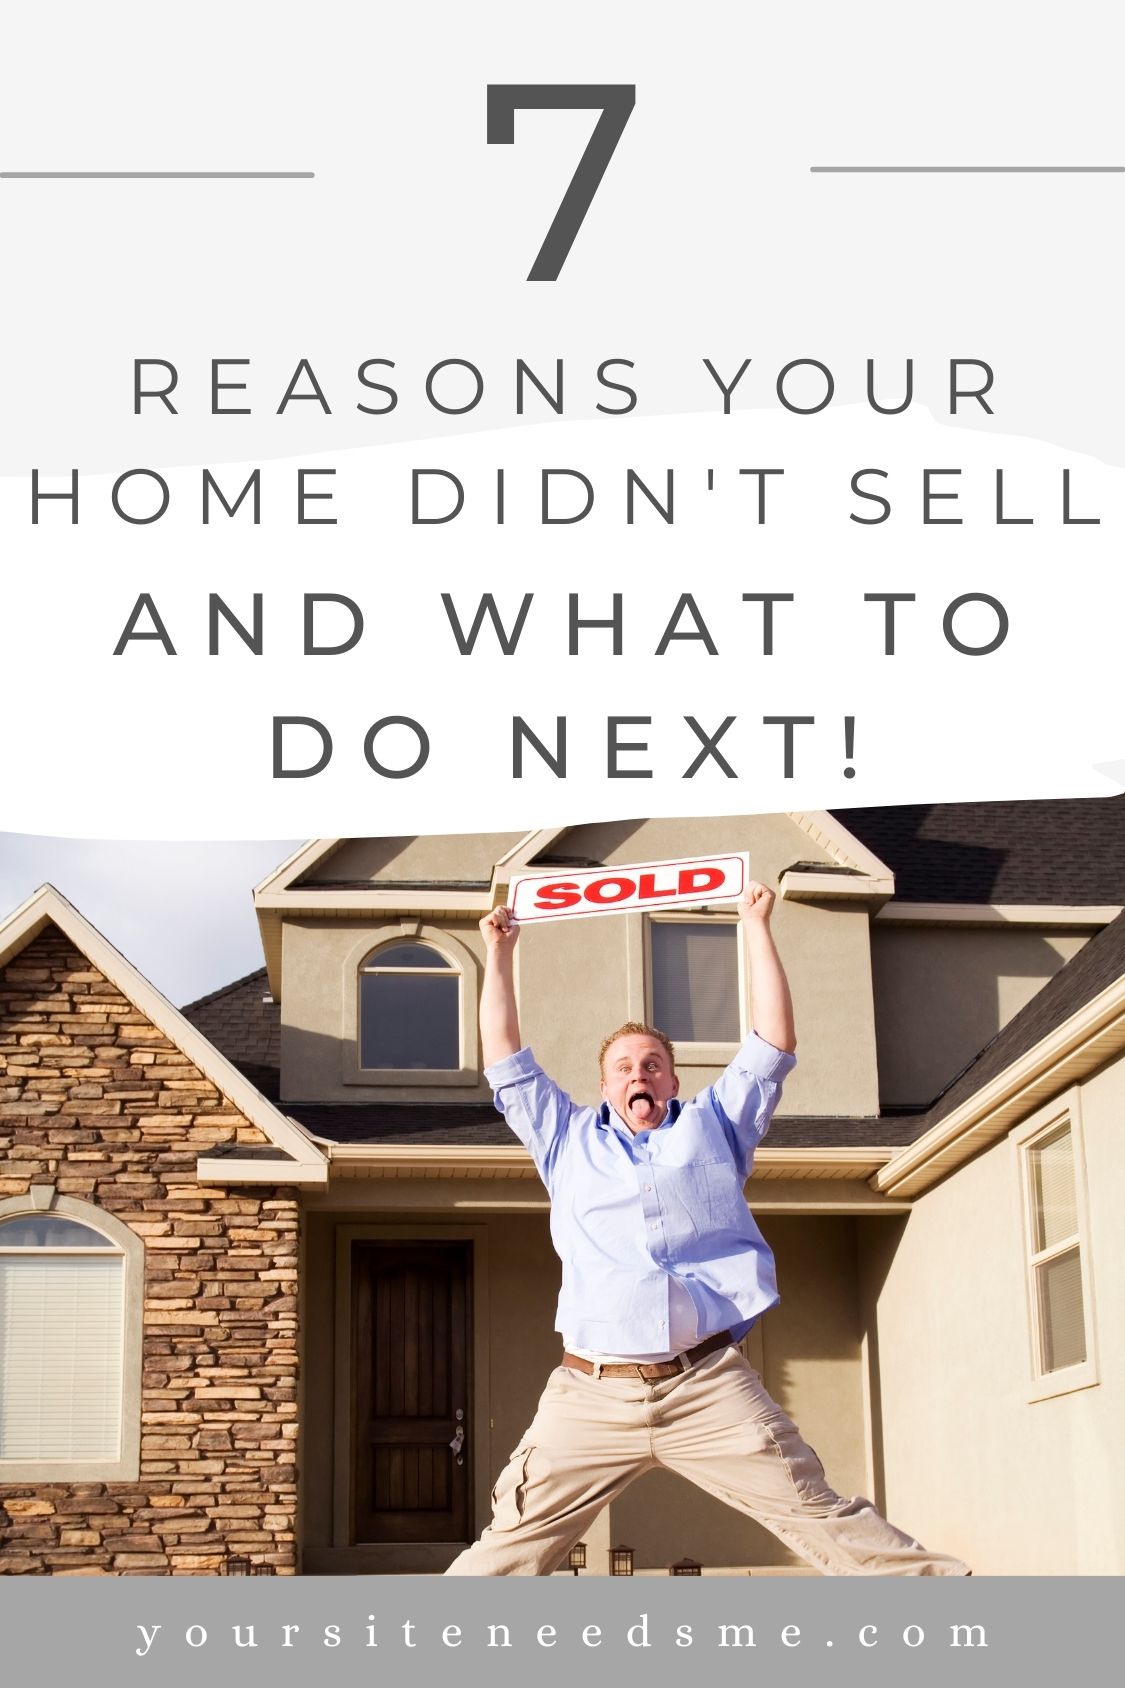 7 Reasons Your Home Didn't Sell and What to Do Next